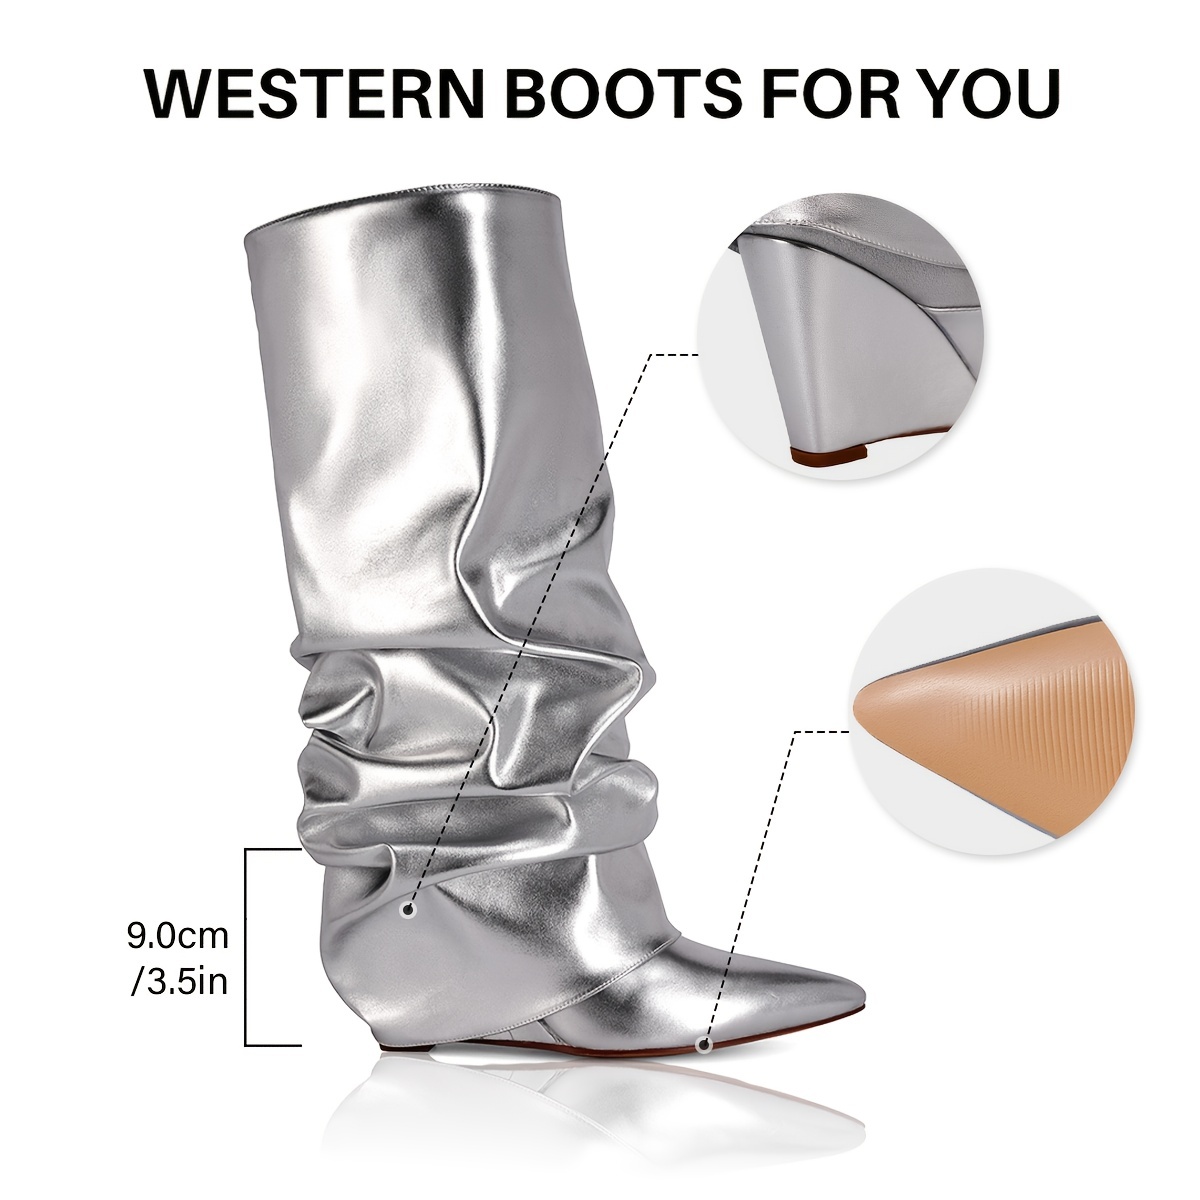 Women's Silver Metallic Western Pointed Wedge Heeled Knee Boots - Size 9